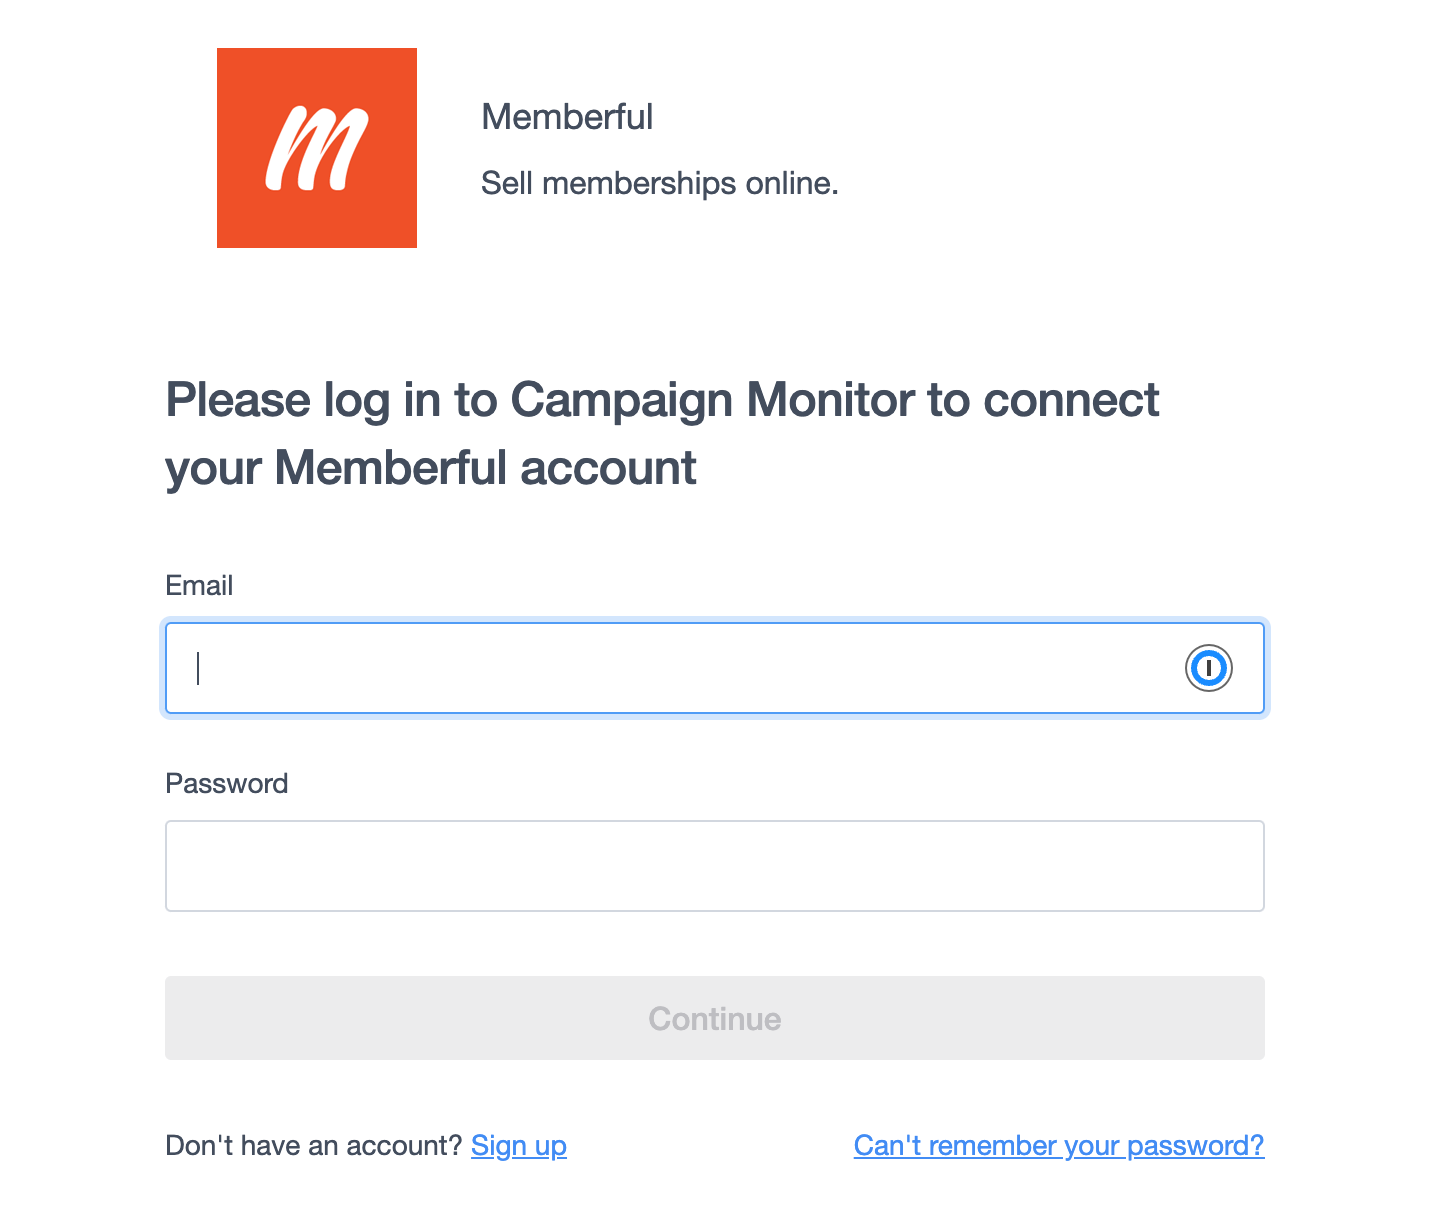 Authorize Memberful to access your Campaign Monitor